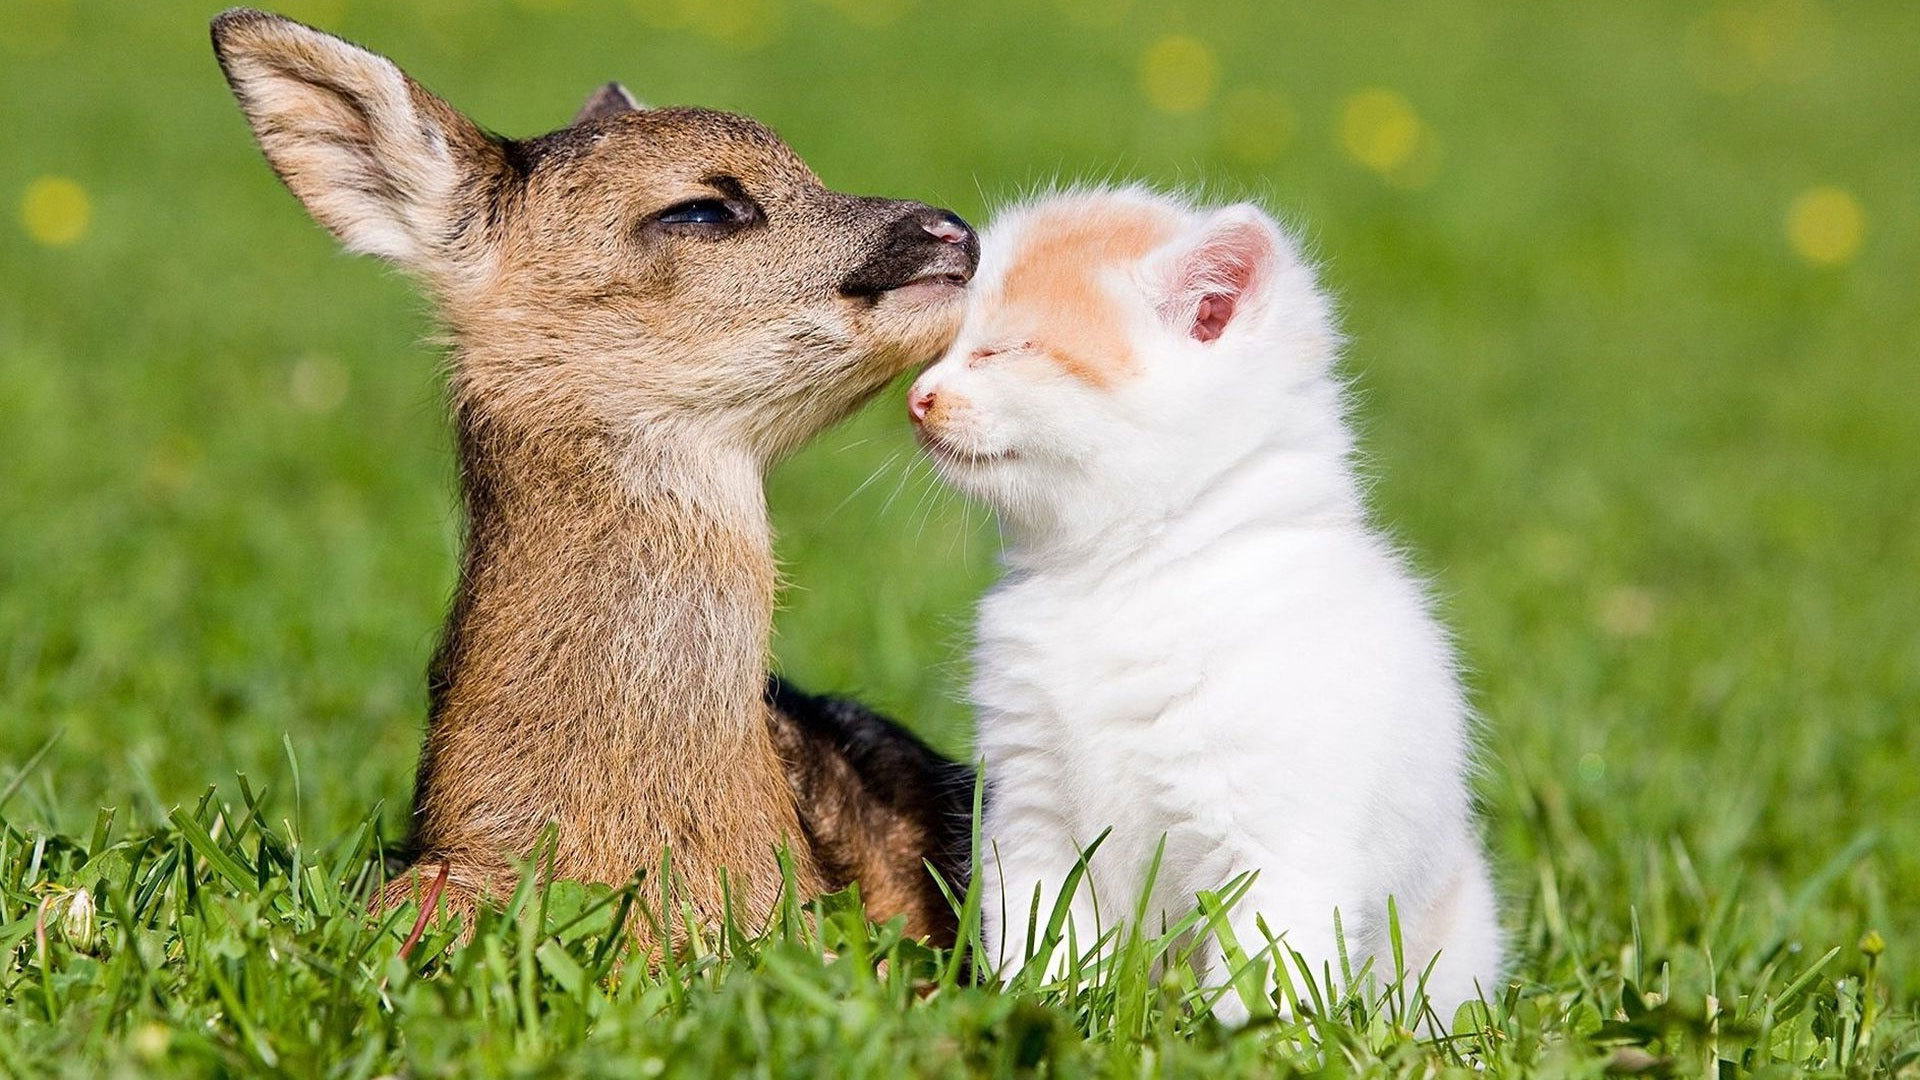 Free download Kitten and baby deer wallpaper and image wallpaper picture [1920x1080] for your Desktop, Mobile & Tablet. Explore Spring Baby Animals Desktop Wallpaper. Free Spring Desktop Wallpaper, Free